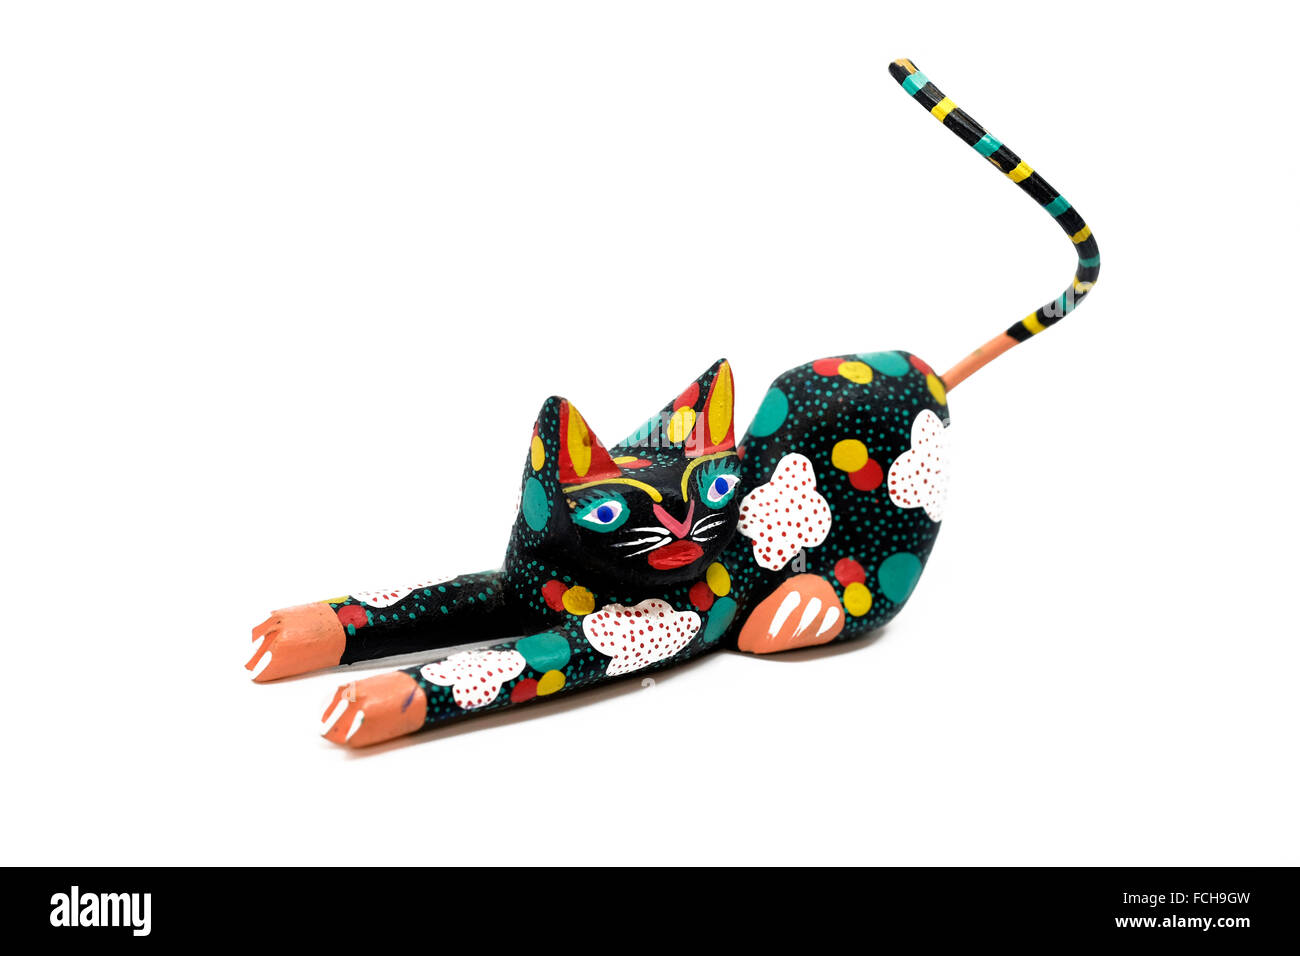 Mexican carved cat figurine ,highly stylized and colored, cut-out on a white background Stock Photo